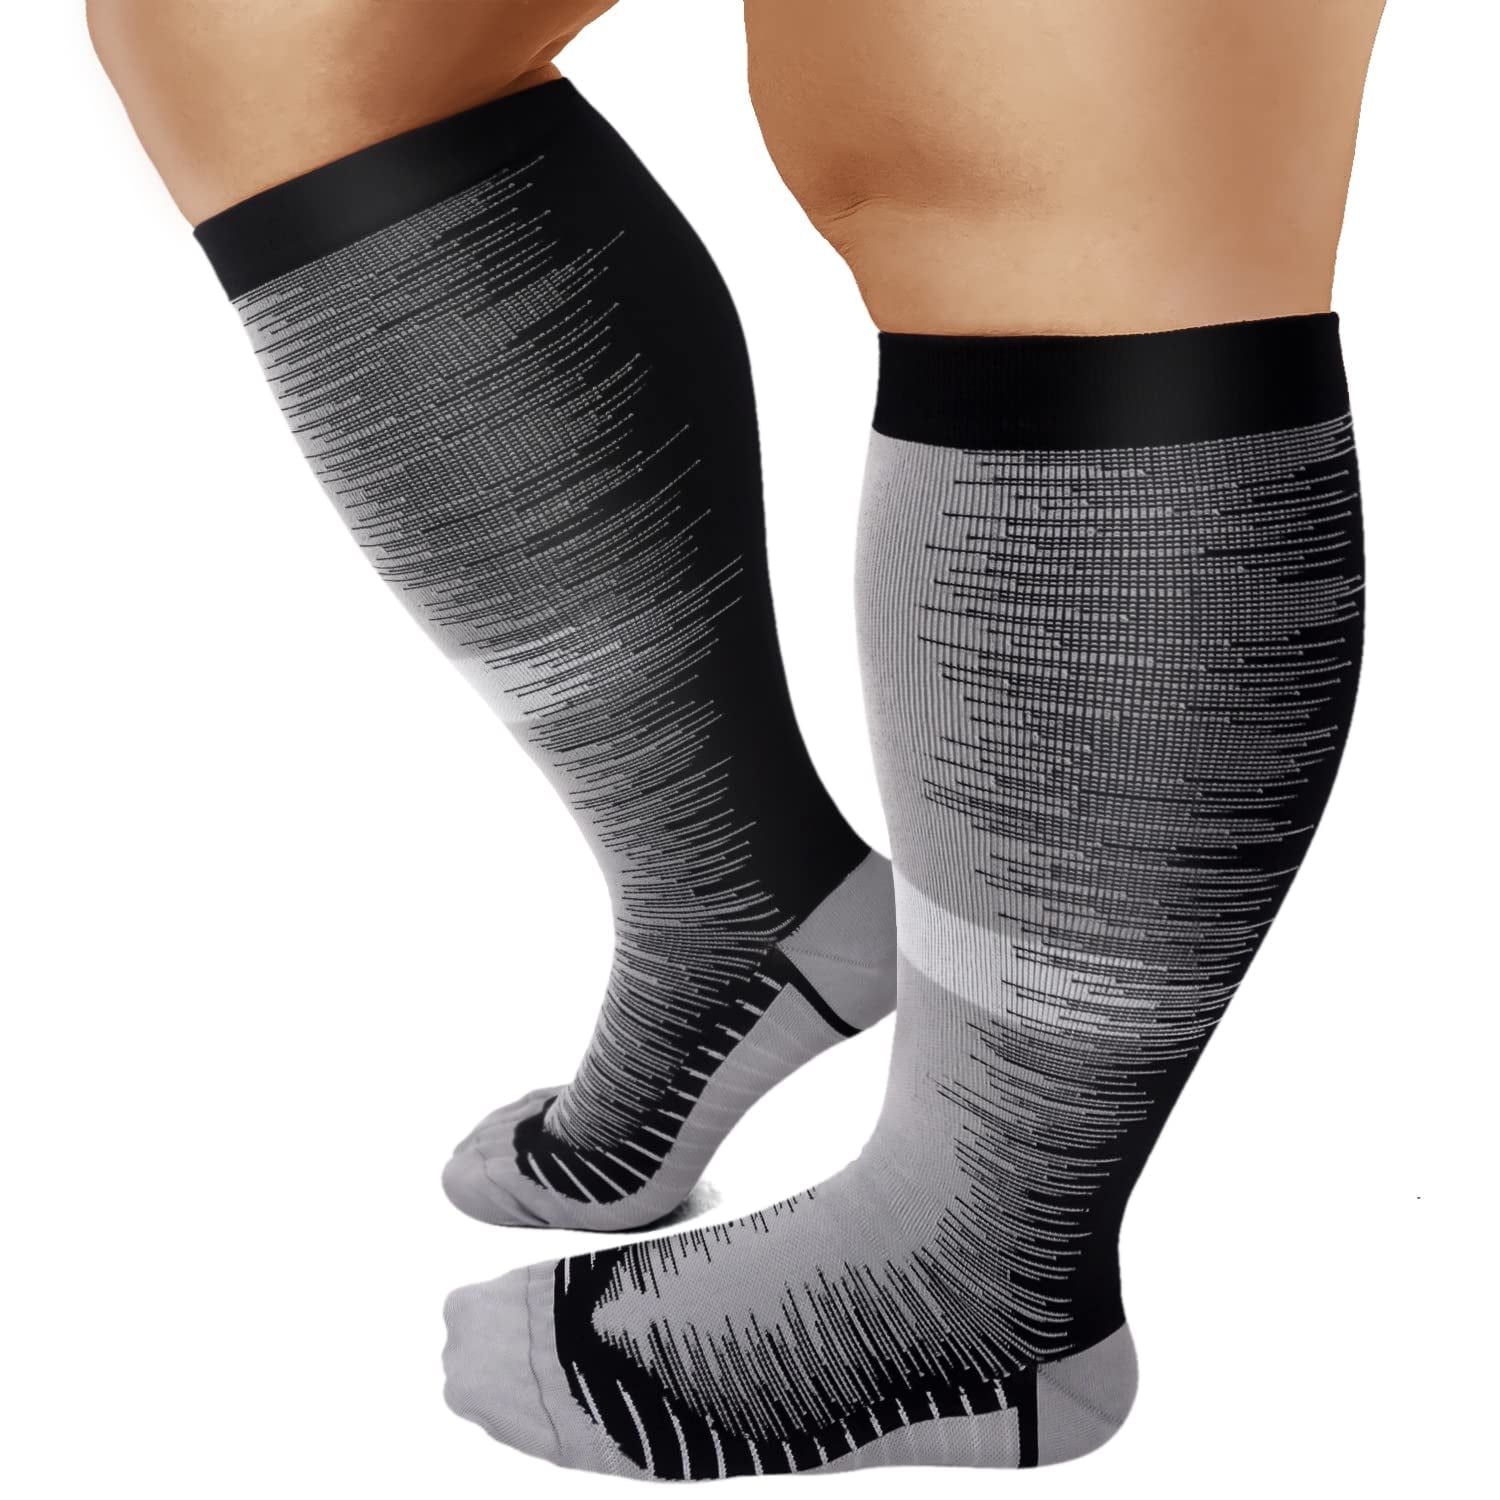  Zingso Wide Calf Compression Socks Women, 2 Pairs Plus Size  Knee High Stockings Large Support Socks for Swelling Nurses Running  Pregnant Travel Extra Wide Compression Socks for Women Men : Clothing